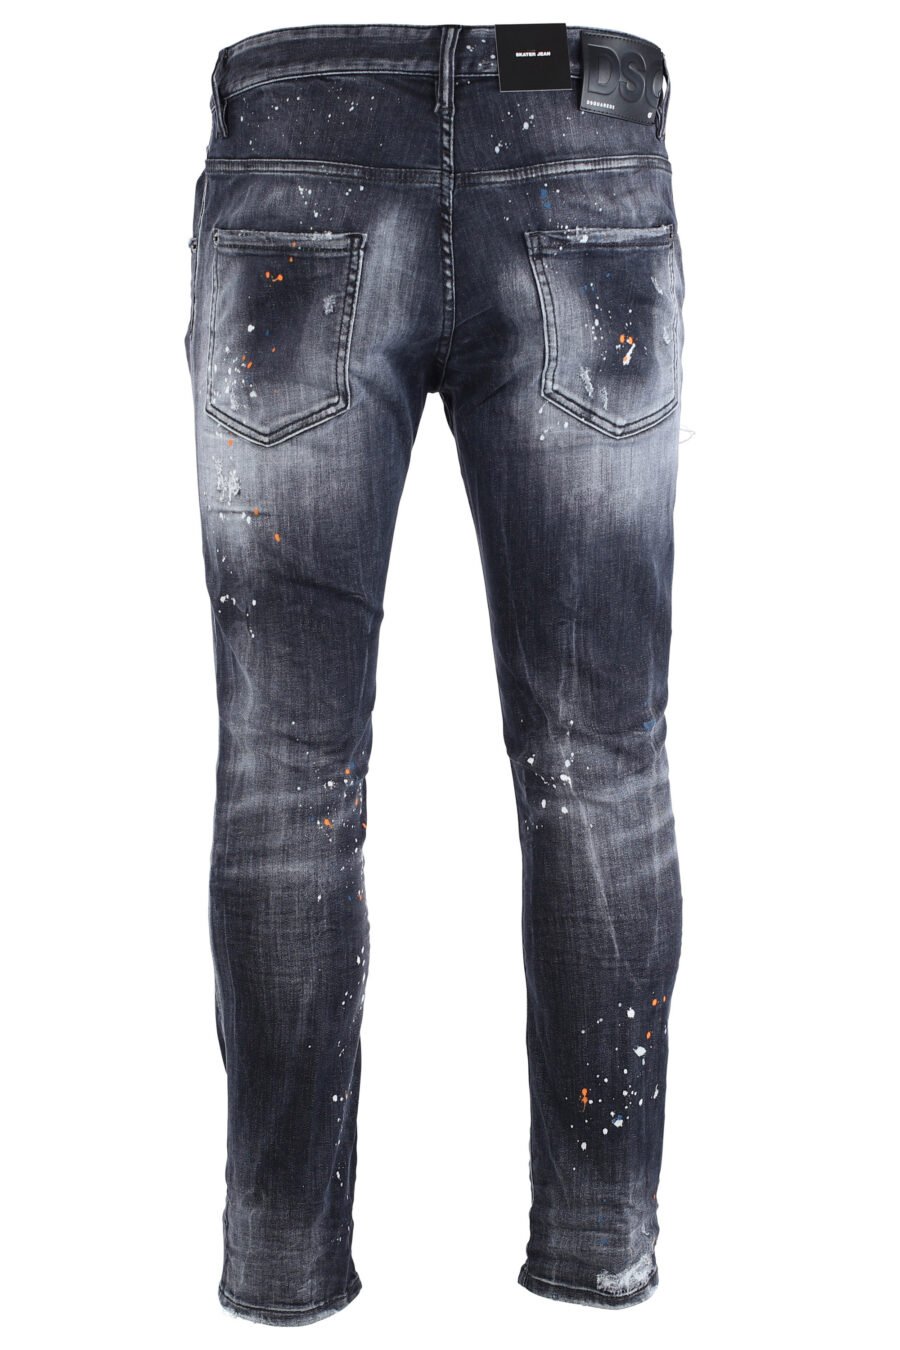 Black "skater jean" jeans with rips - IMG 1610